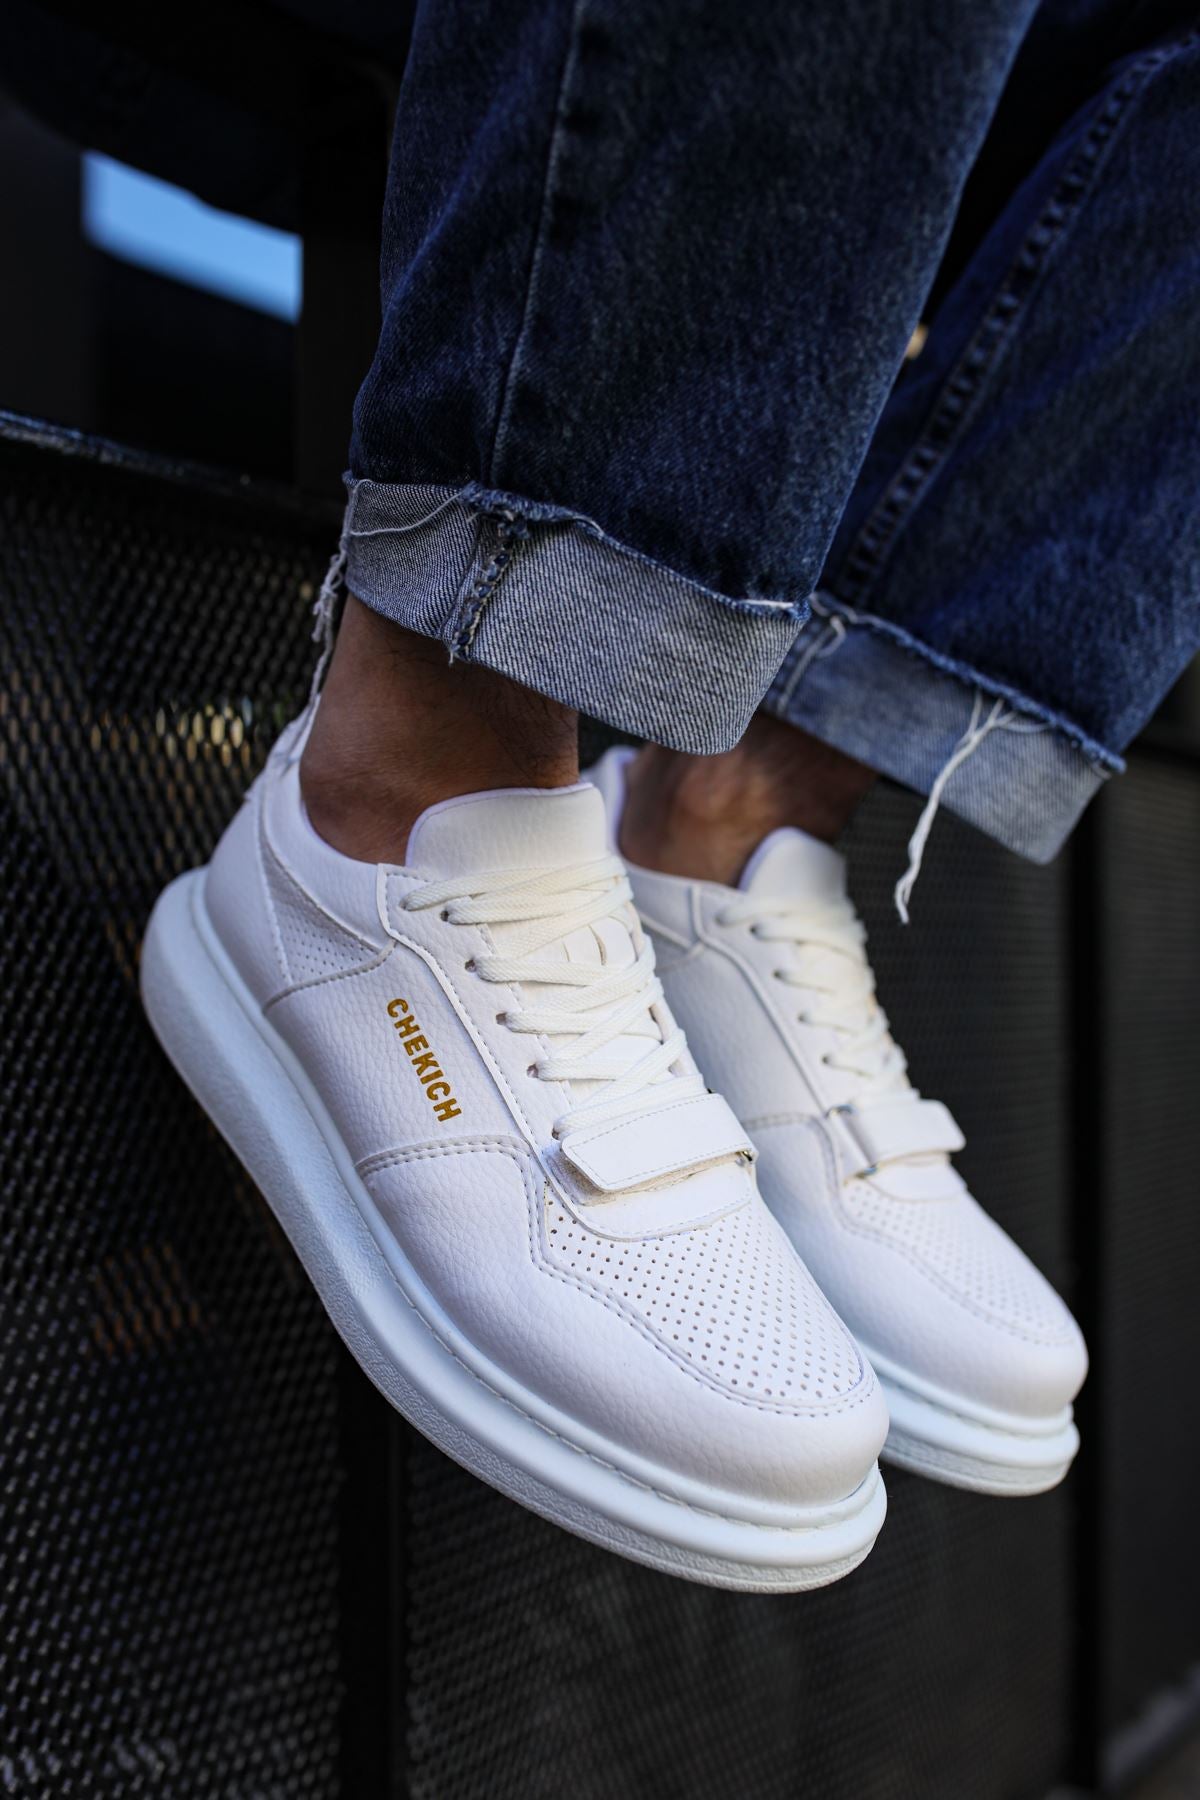 CH073 Men's Unisex Full White Lace-Up Casual Sneaker Sports Shoes - STREETMODE ™